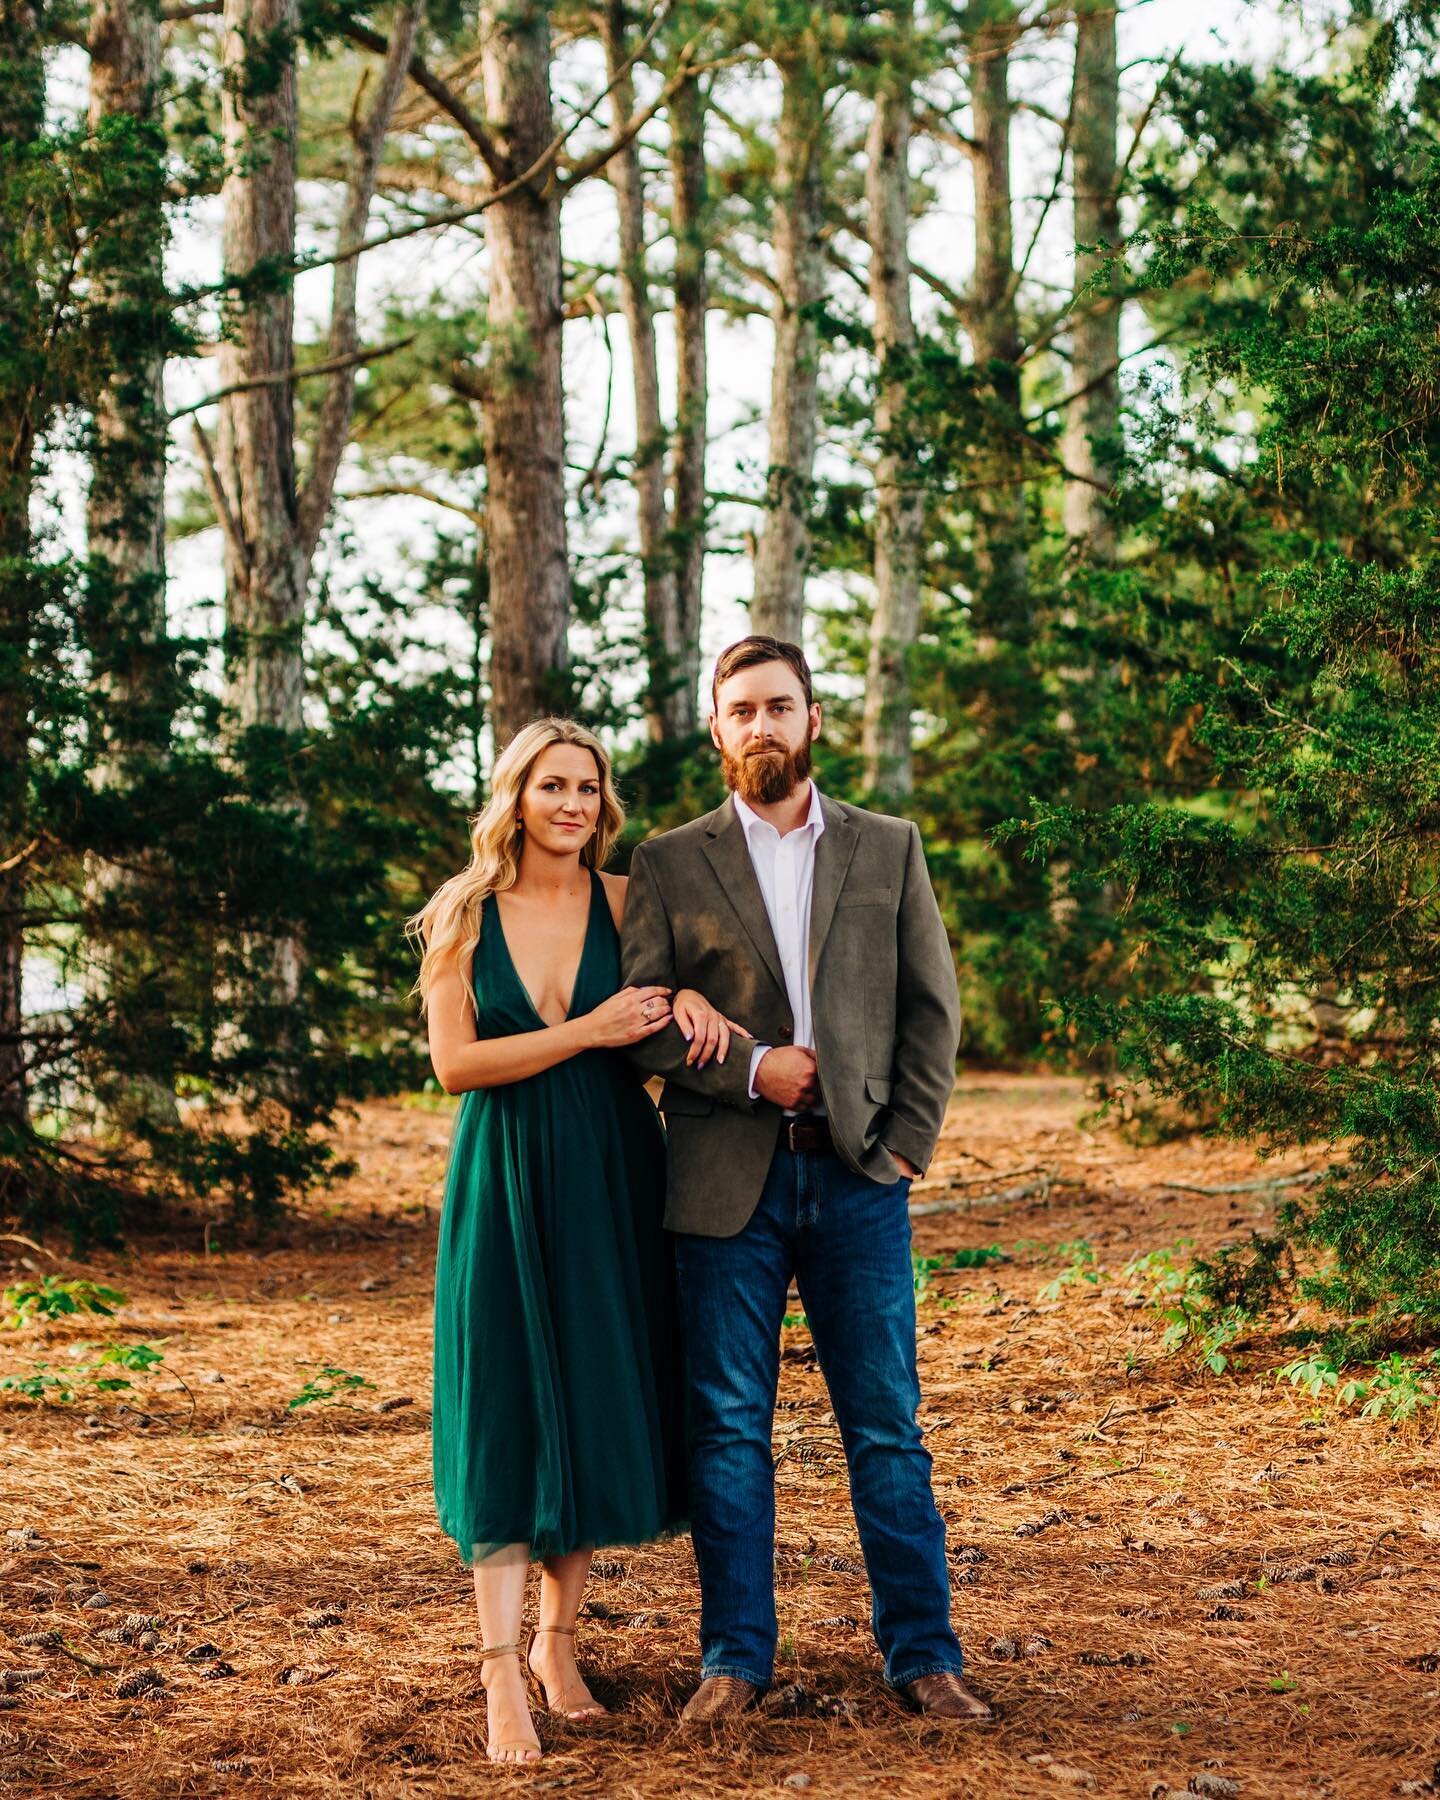 A moment for the dress. 🤩Cruising around the property that these two are going to get married on has us so excited for their wedding in July! Such a fun evening &amp; such a sweet couple. 🫶🏼